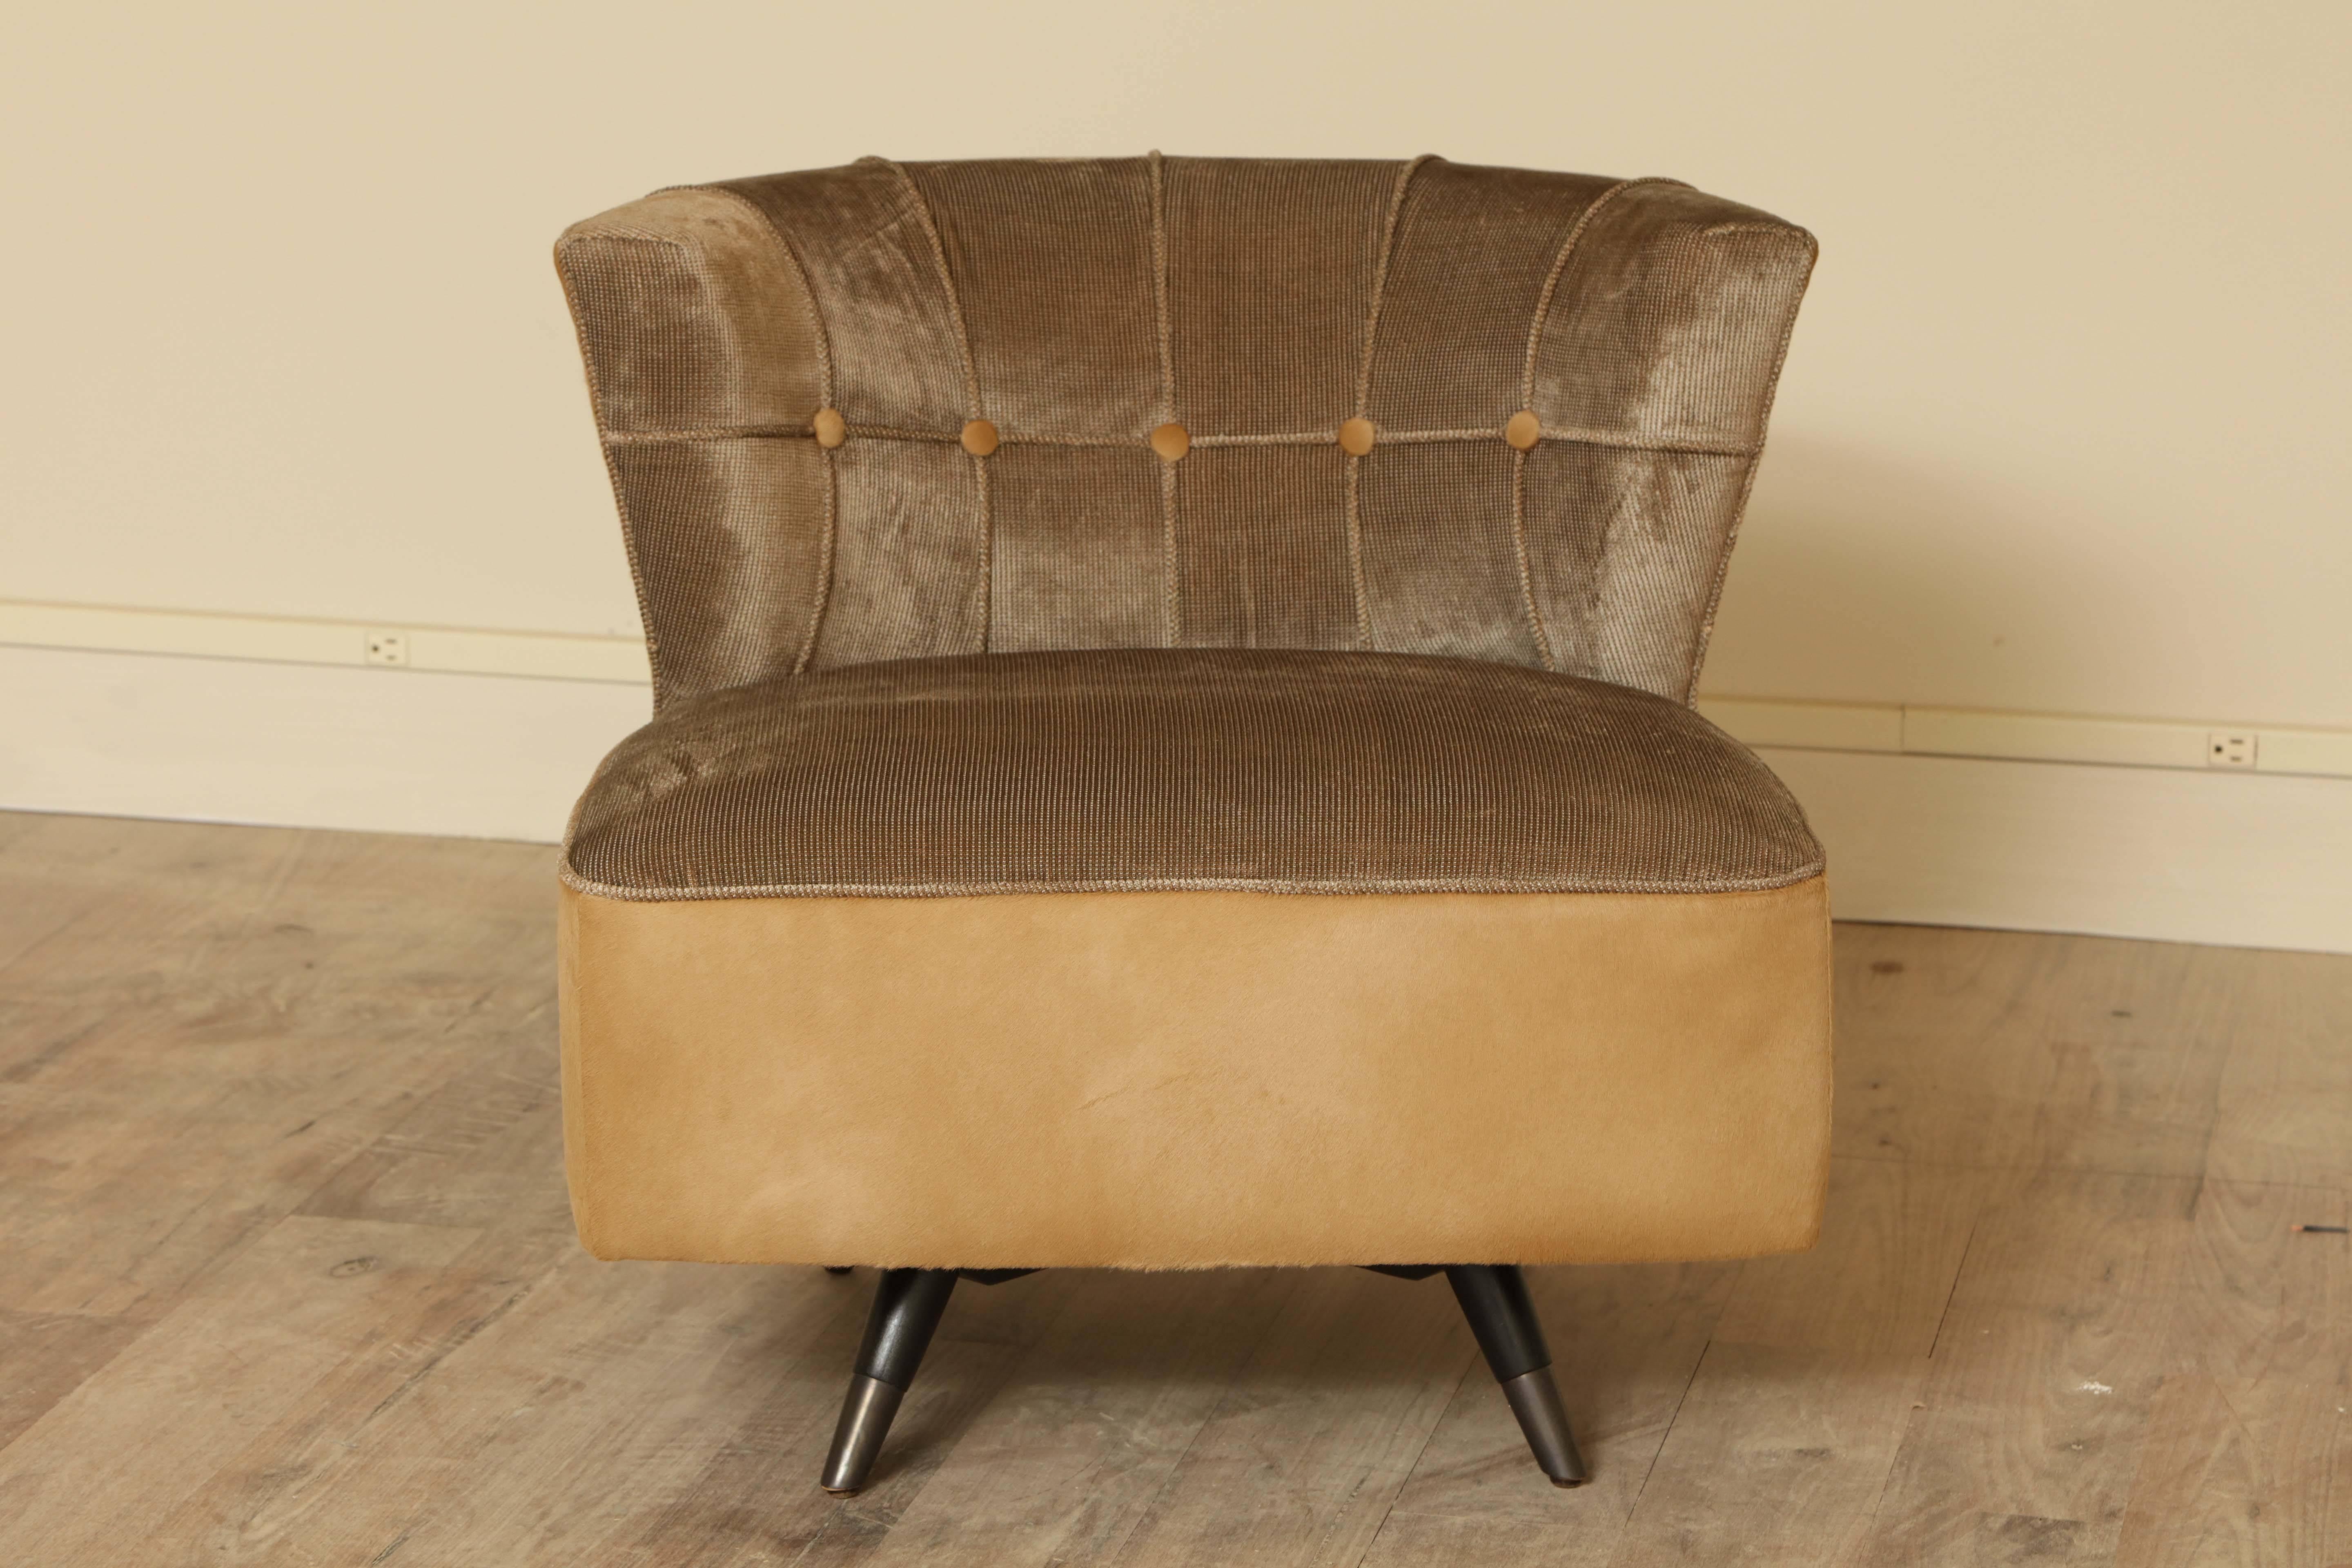 Pair of button tufted barrel back swivel chairs by Kroehler, circa 1960 upholstered in taupe Parris velvet by Thomas O'Brien for Lee Jofa with calf hair on hide bases and outside backs.